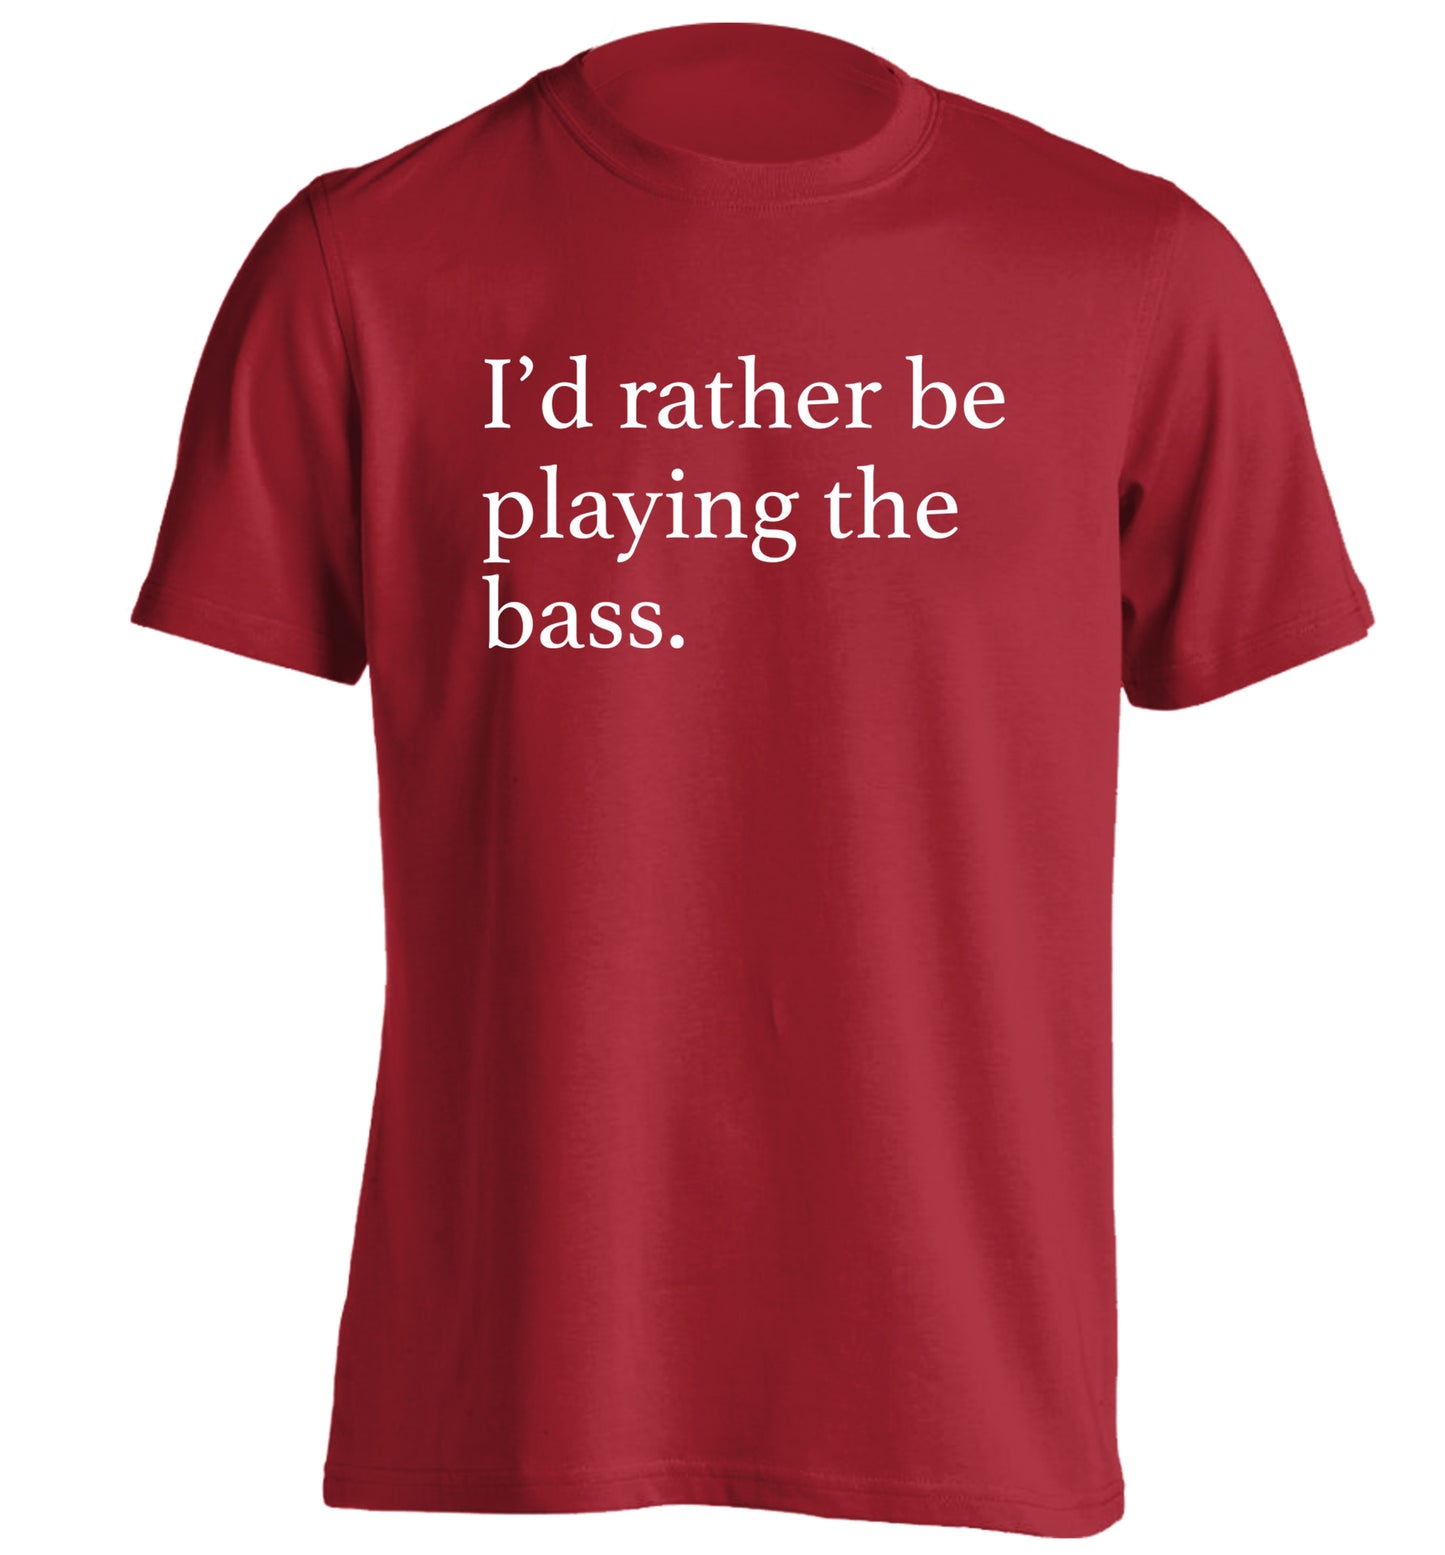 I'd rather by playing the bass adults unisex red Tshirt 2XL